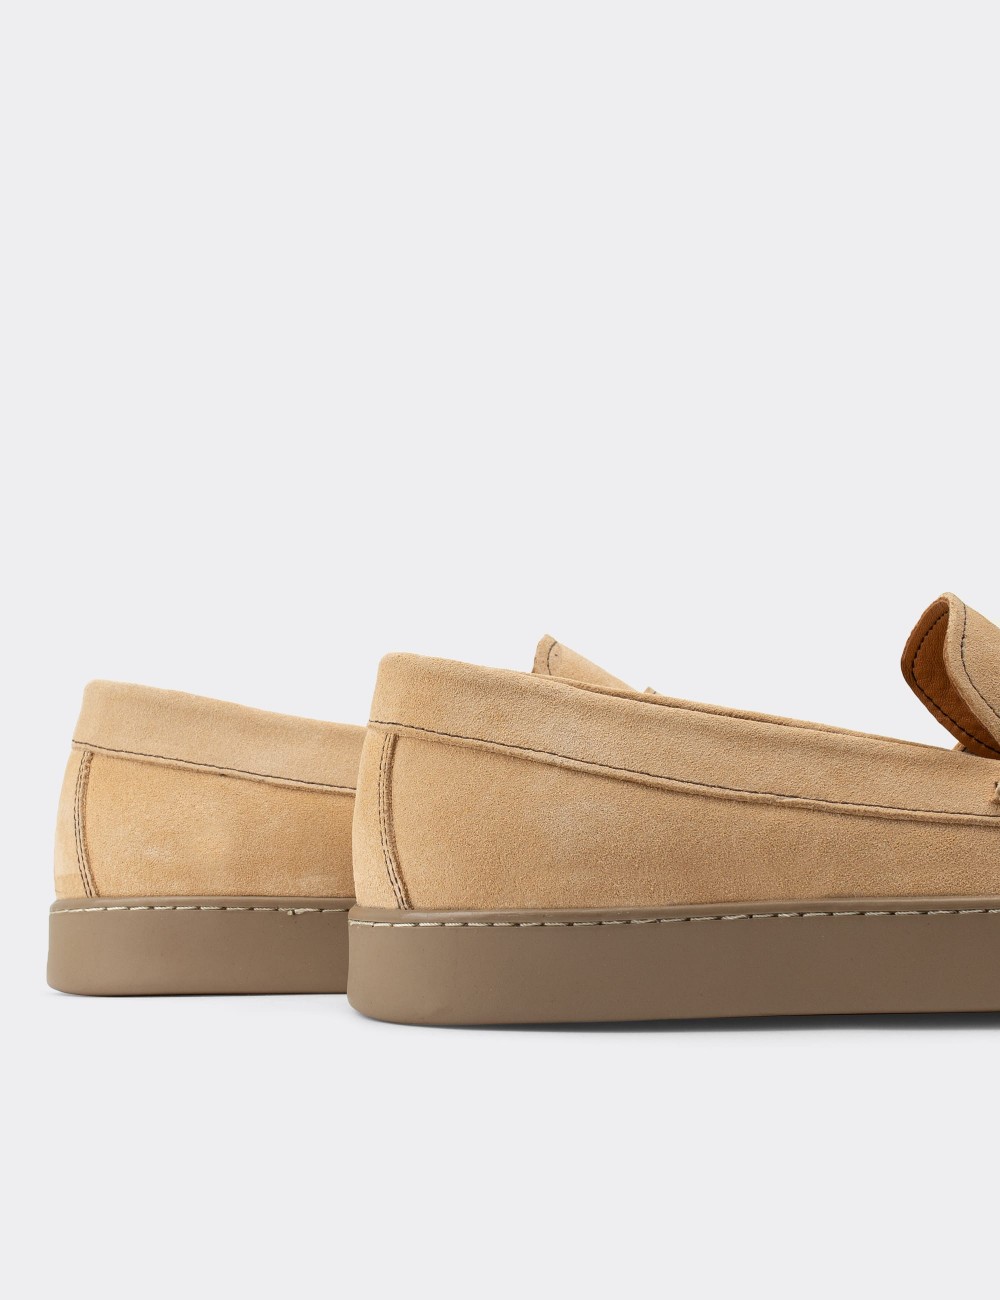 Beige Suede Leather Loafers - 01870MBEJC01